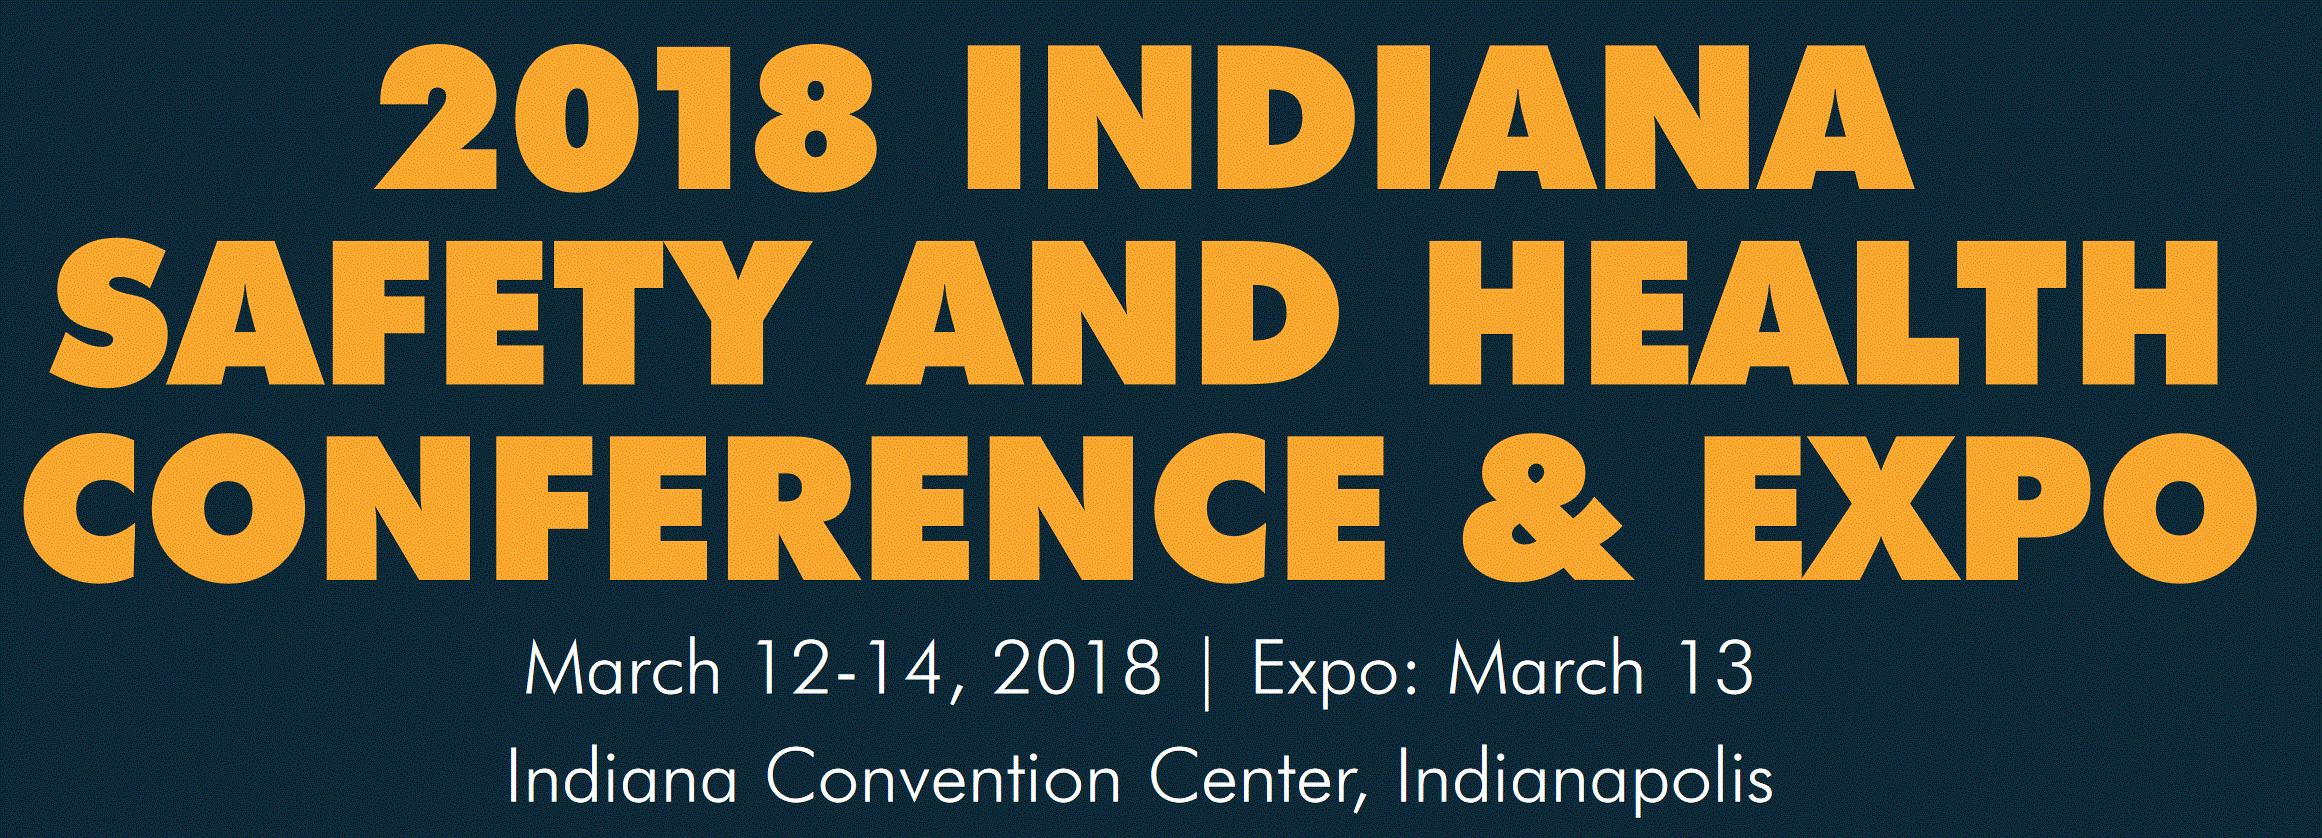 Indiana Safety & Health Conference